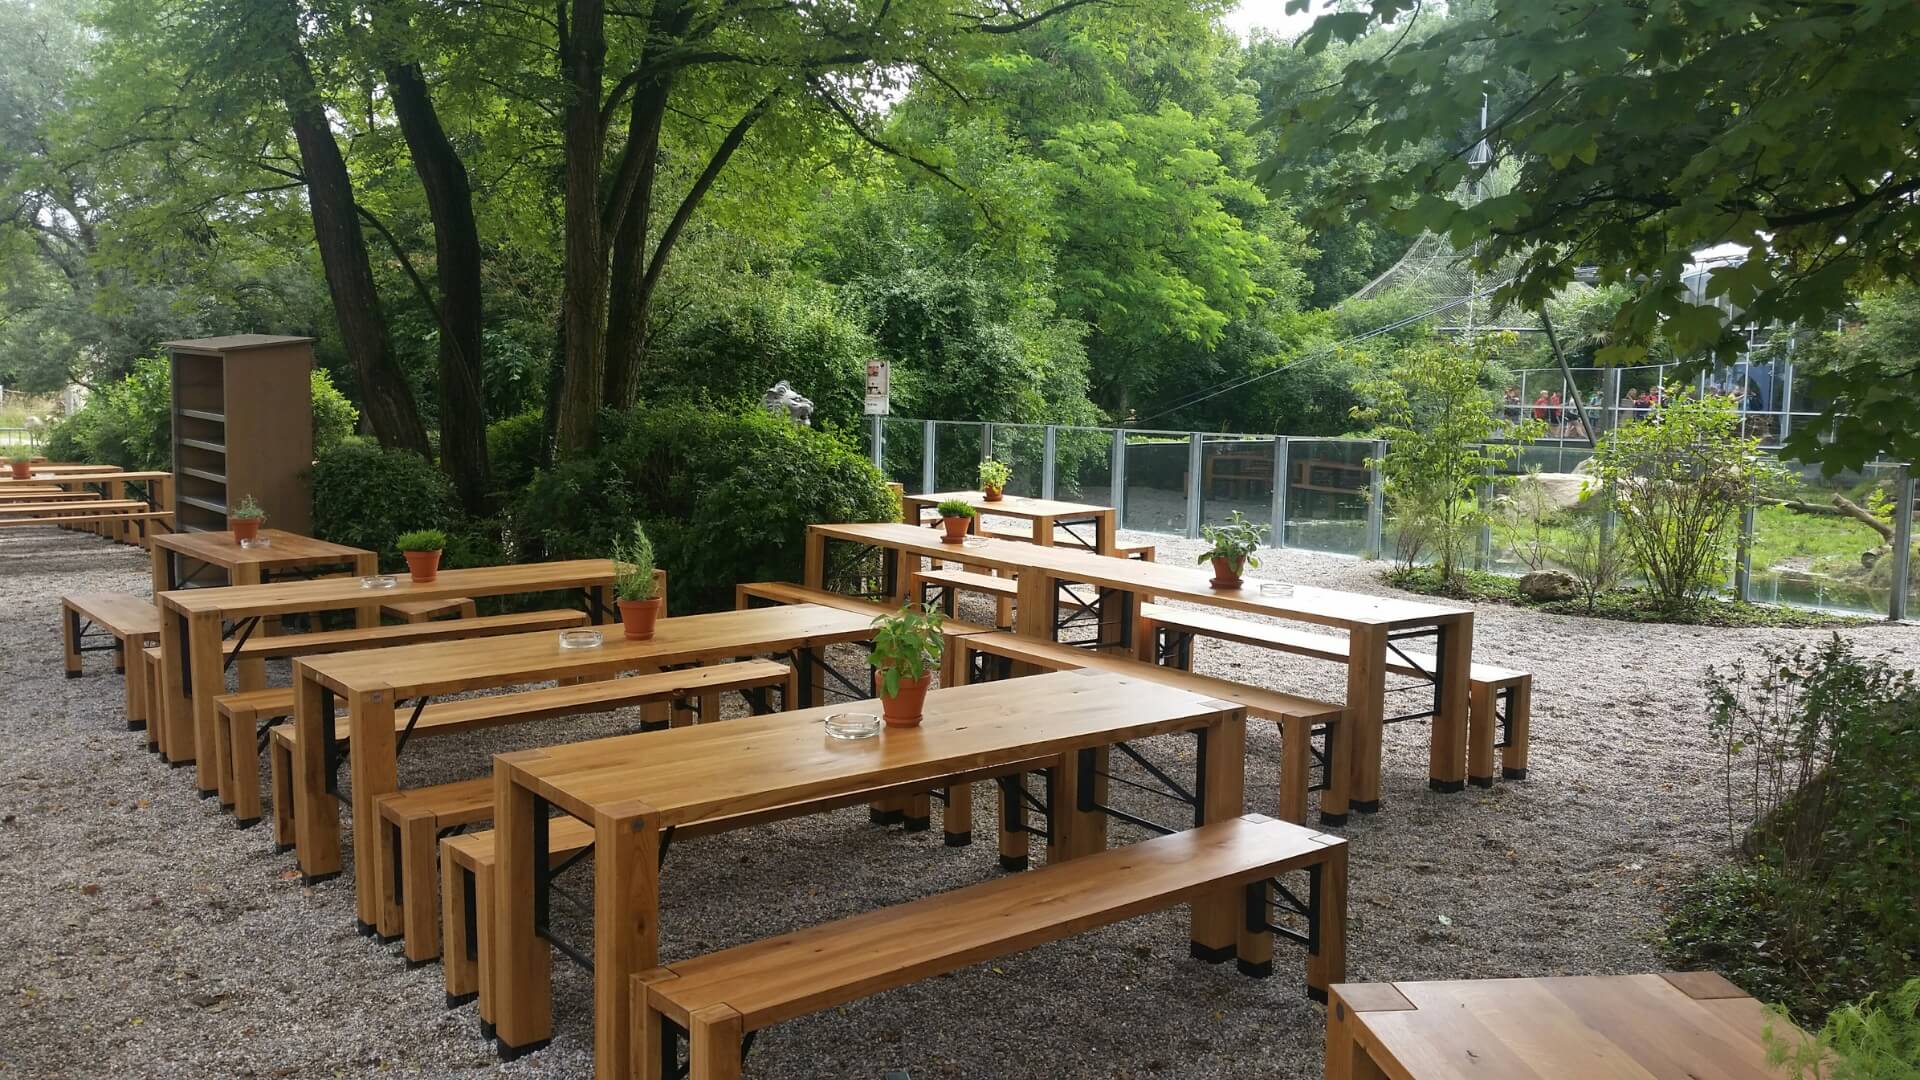 Several Lagos are set up in the Tao Garden at Munich Zoo.